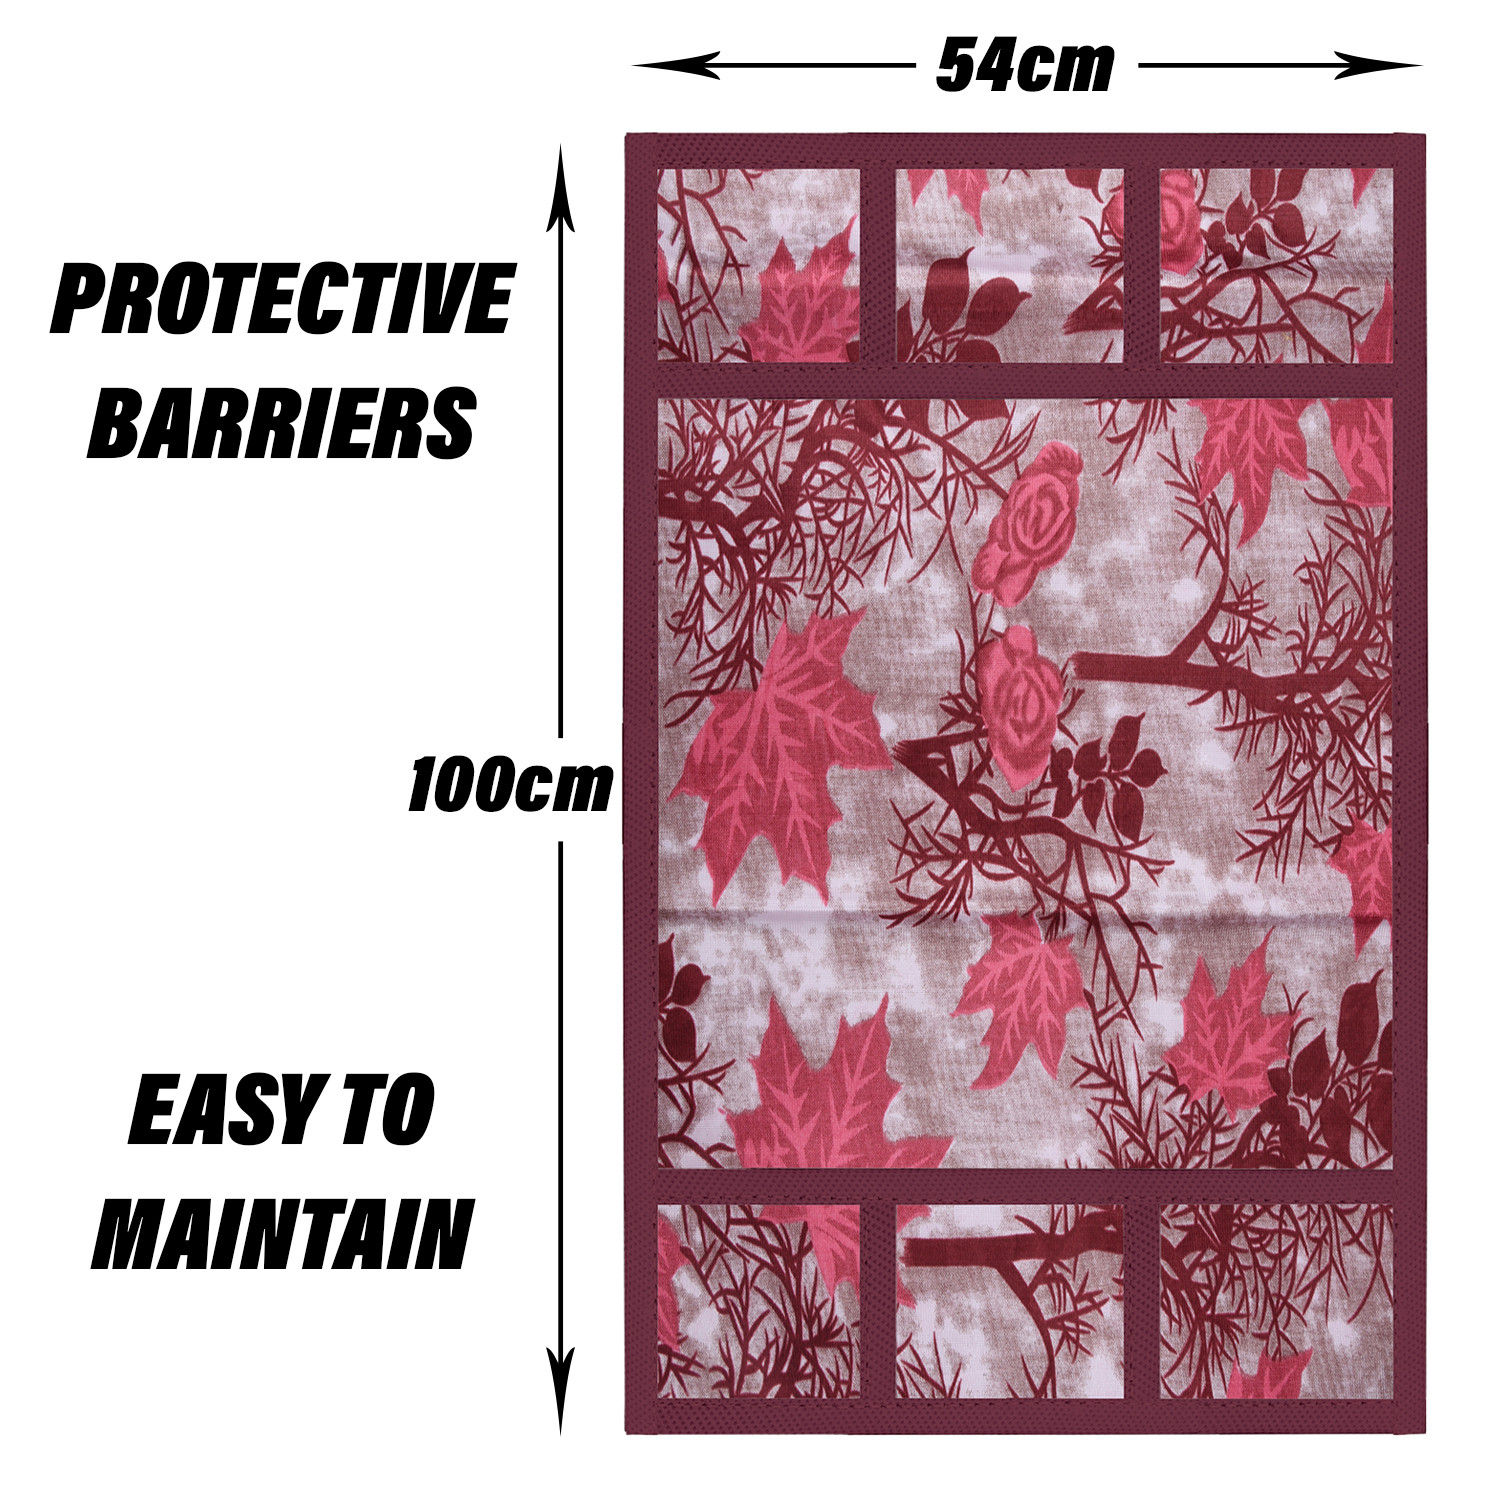 Kuber Industries Fridge Top Cover | Fridge Top Cover with Pockets | Refrigerator Top Cover for Kitchen | Fridge Top Cover with 6 Utility Pockets | Tree Kniting Fridge Cover | Maroon